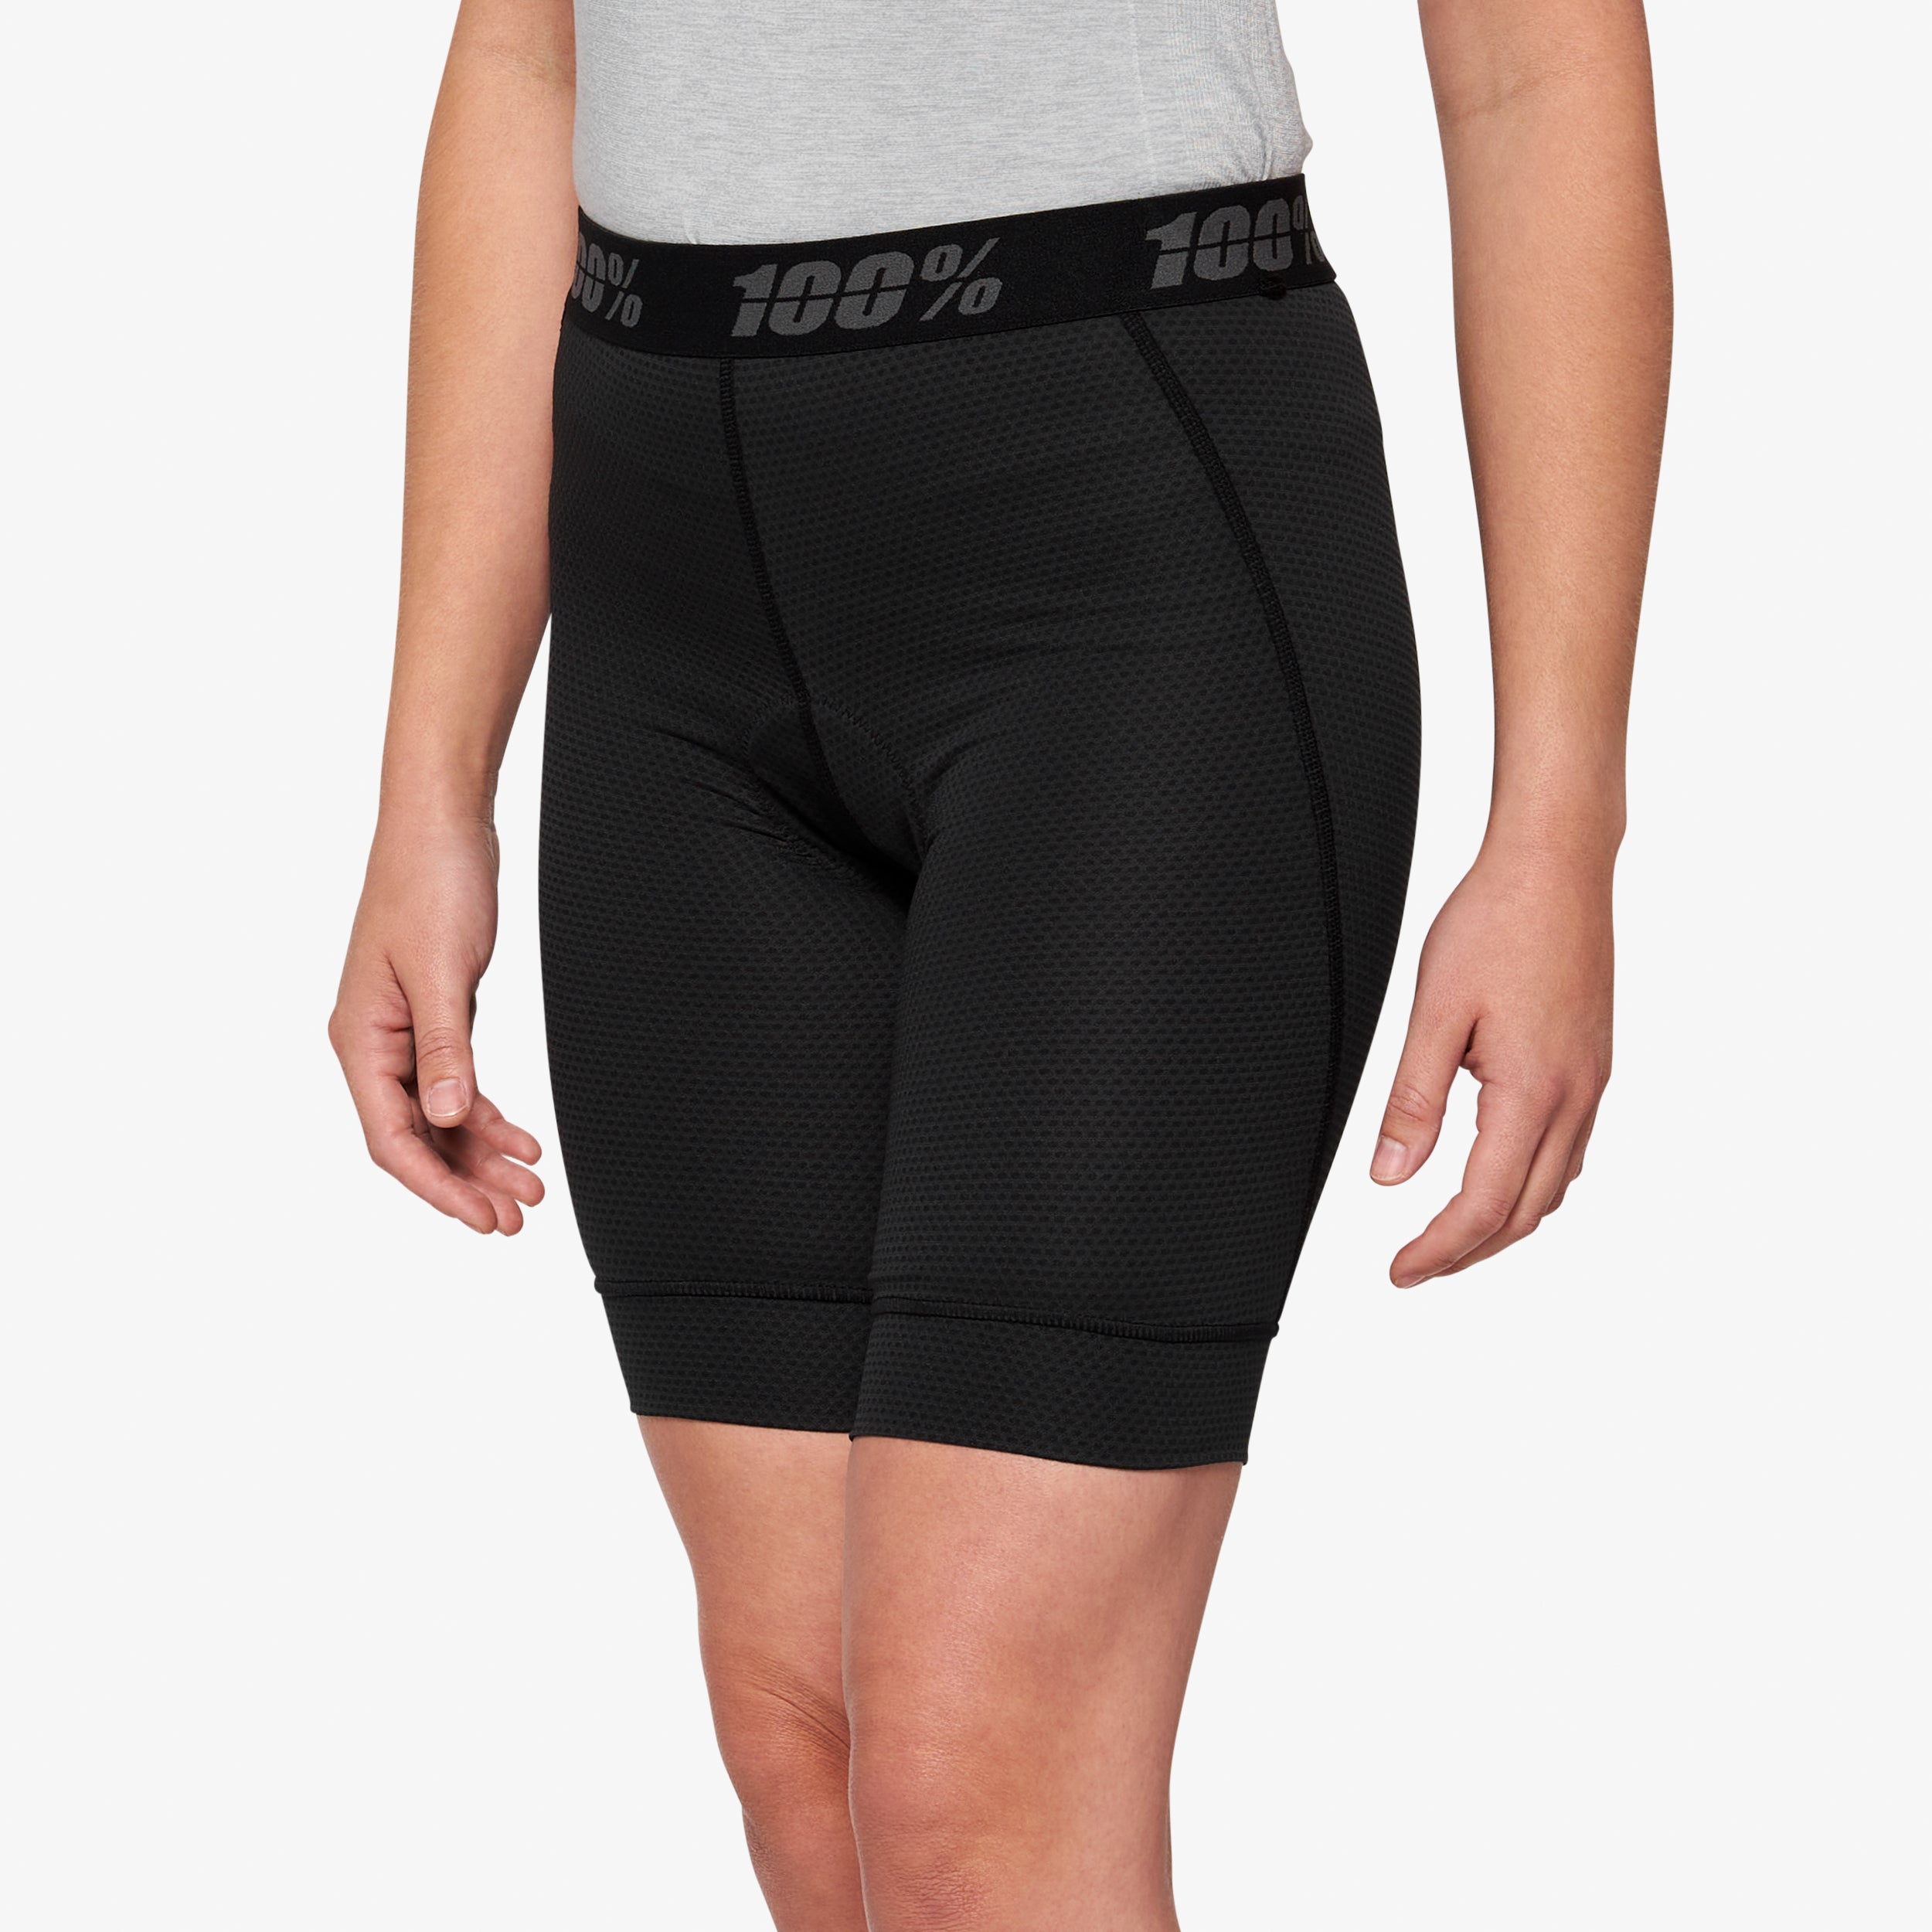 RIDECAMP Women's Shorts w/ Liner Black - Secondary